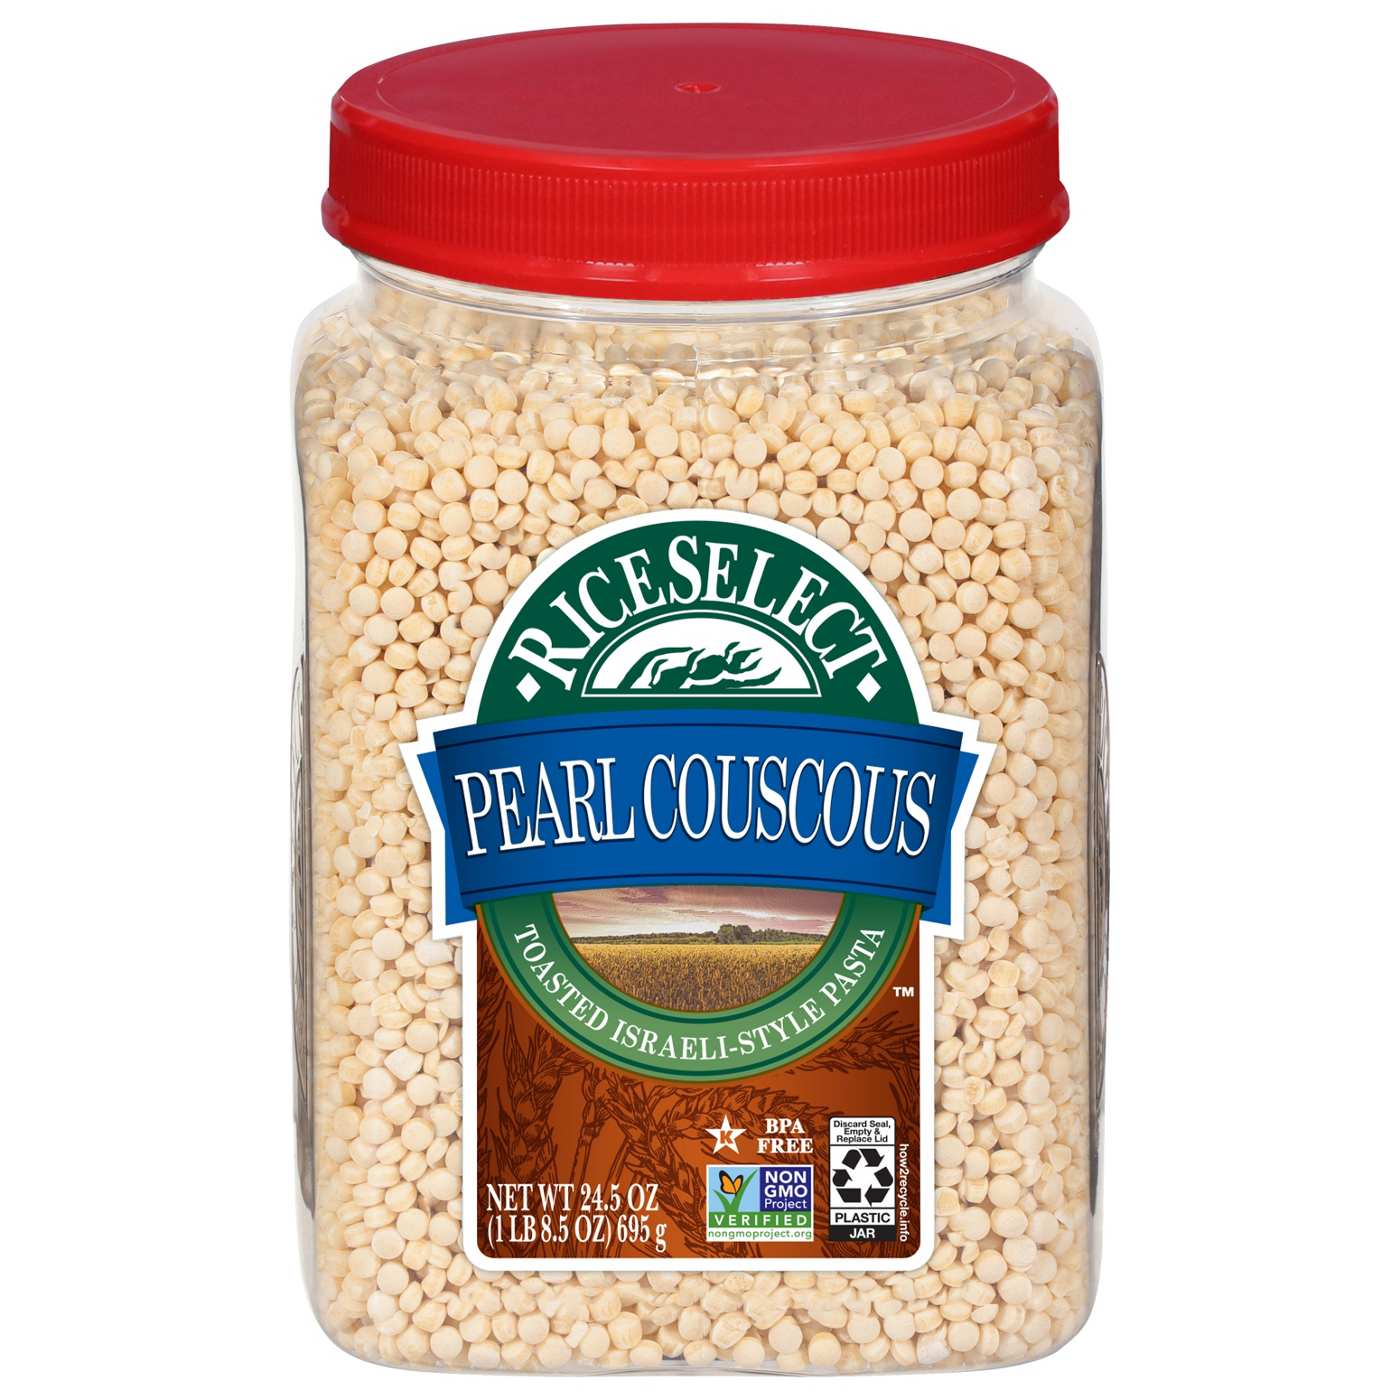 RiceSelect Original Pearl Couscous; image 1 of 6